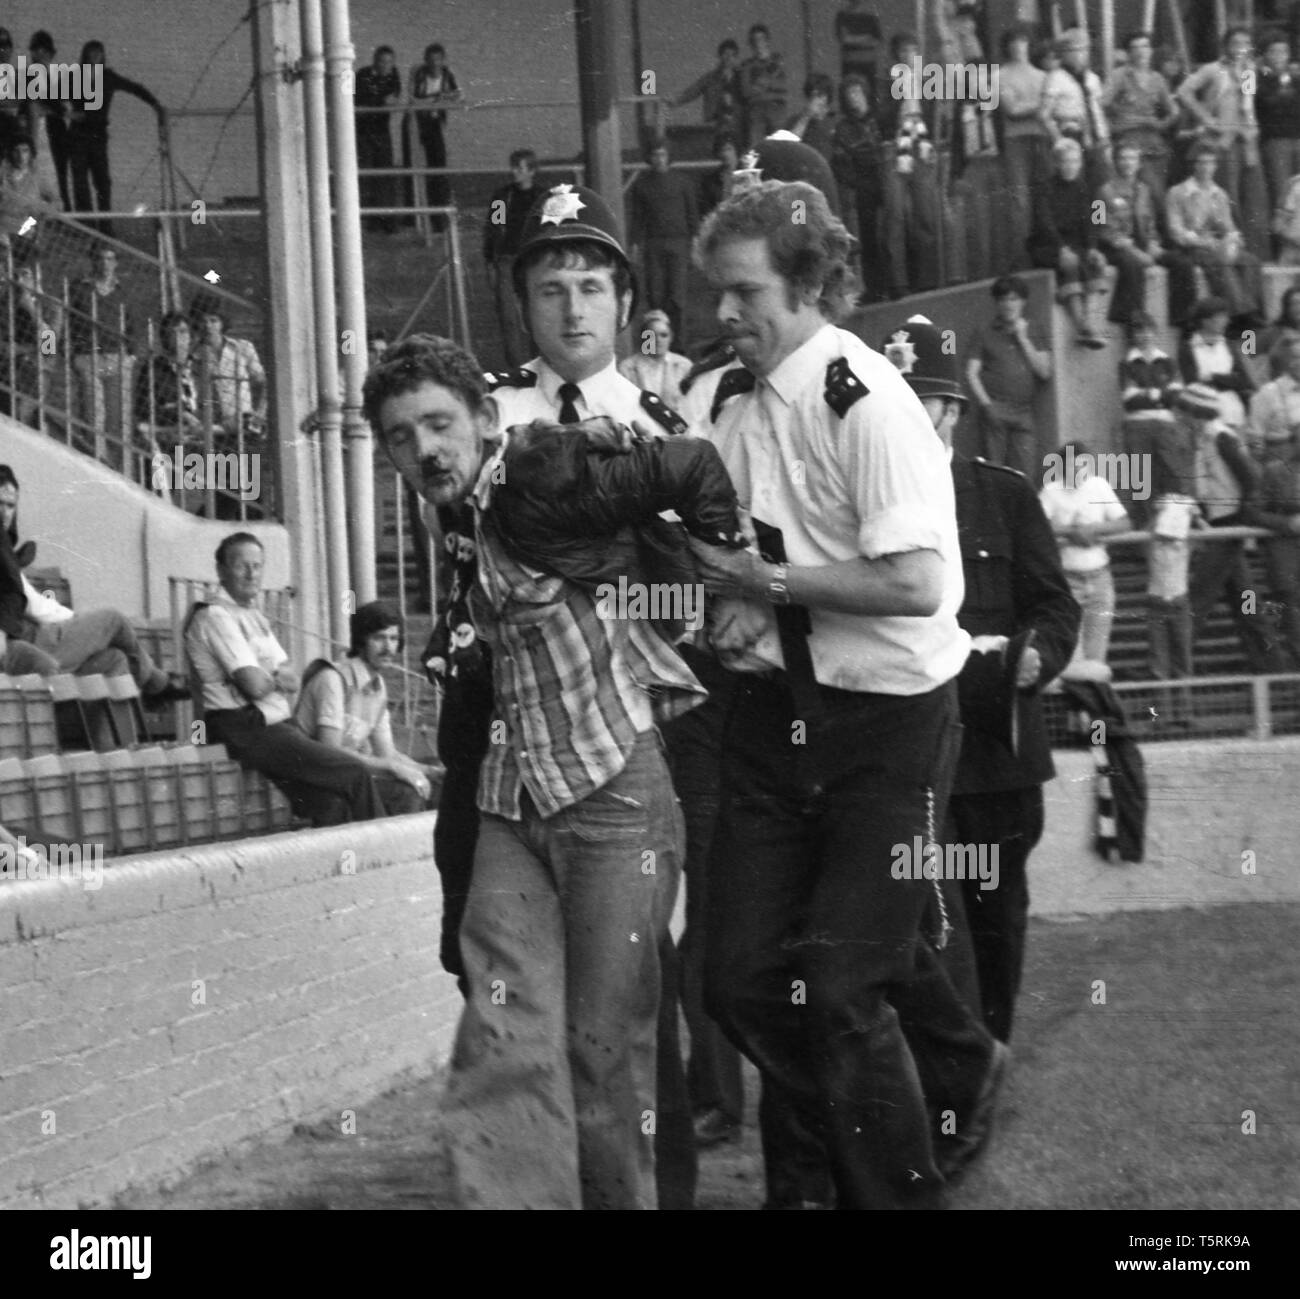 Millwall Football Club, Cold Blow Lane, 1978. Football hooligans being arrested/ejected from the stadium during a match. Stock Photo